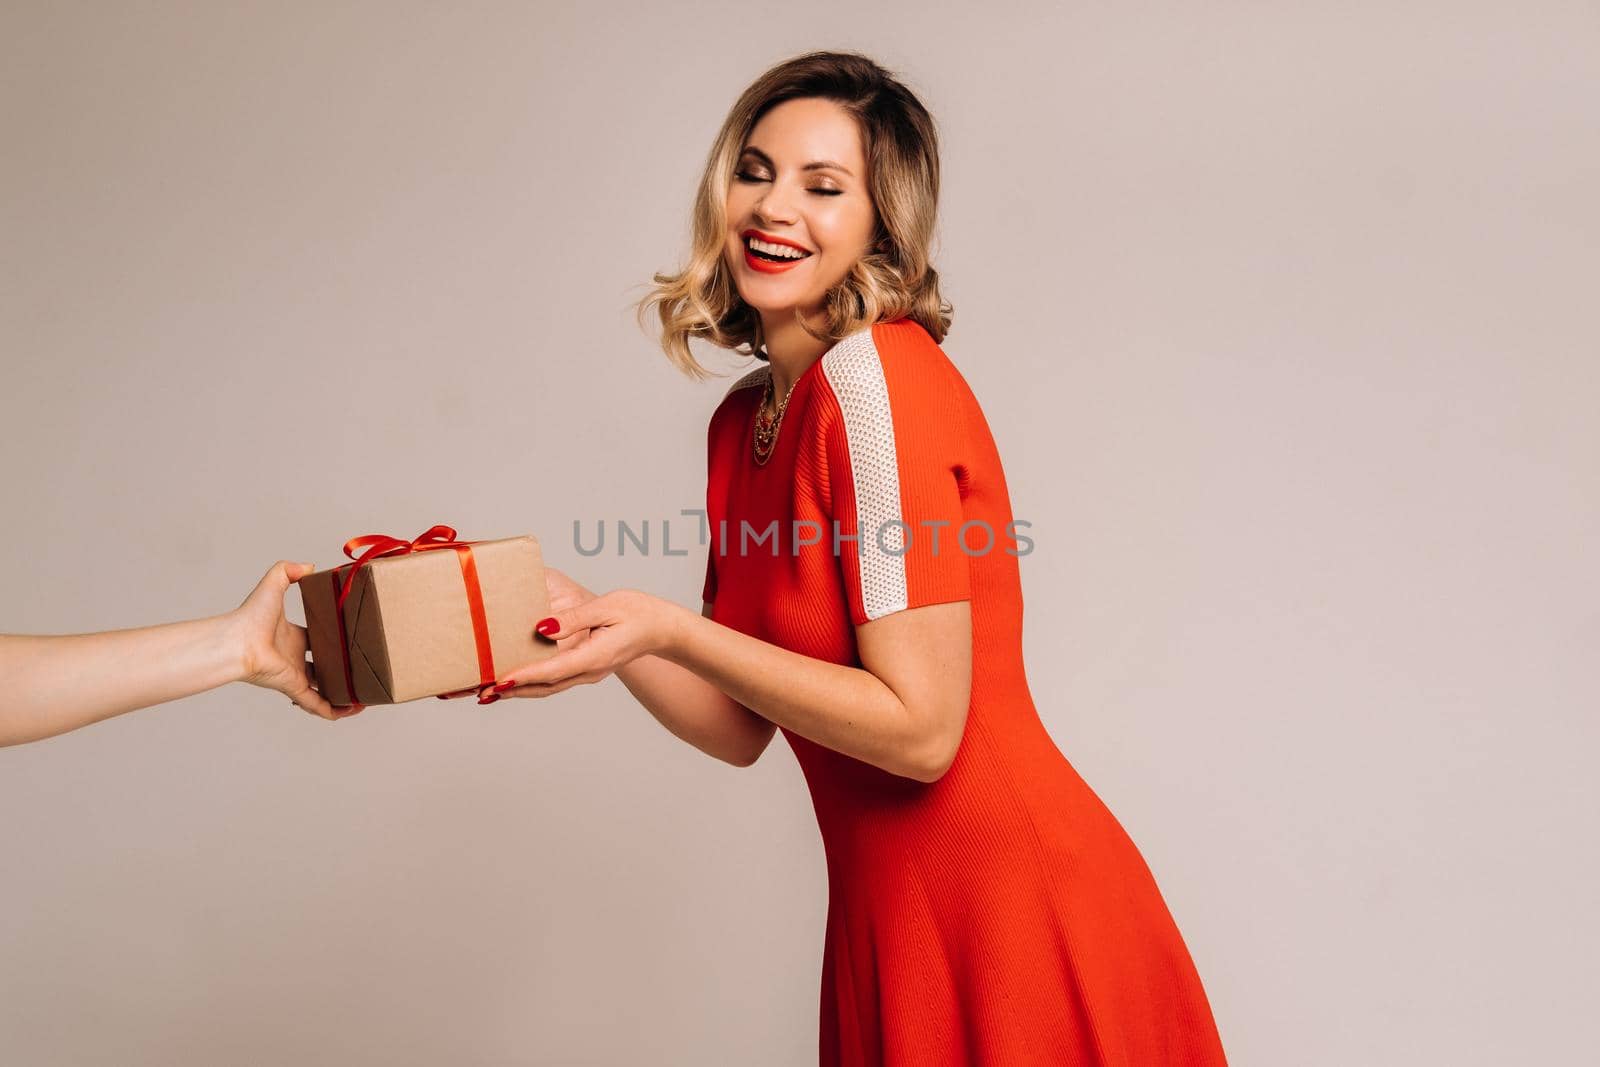 A girl in a red dress is given a gift in her hands on a gray background.